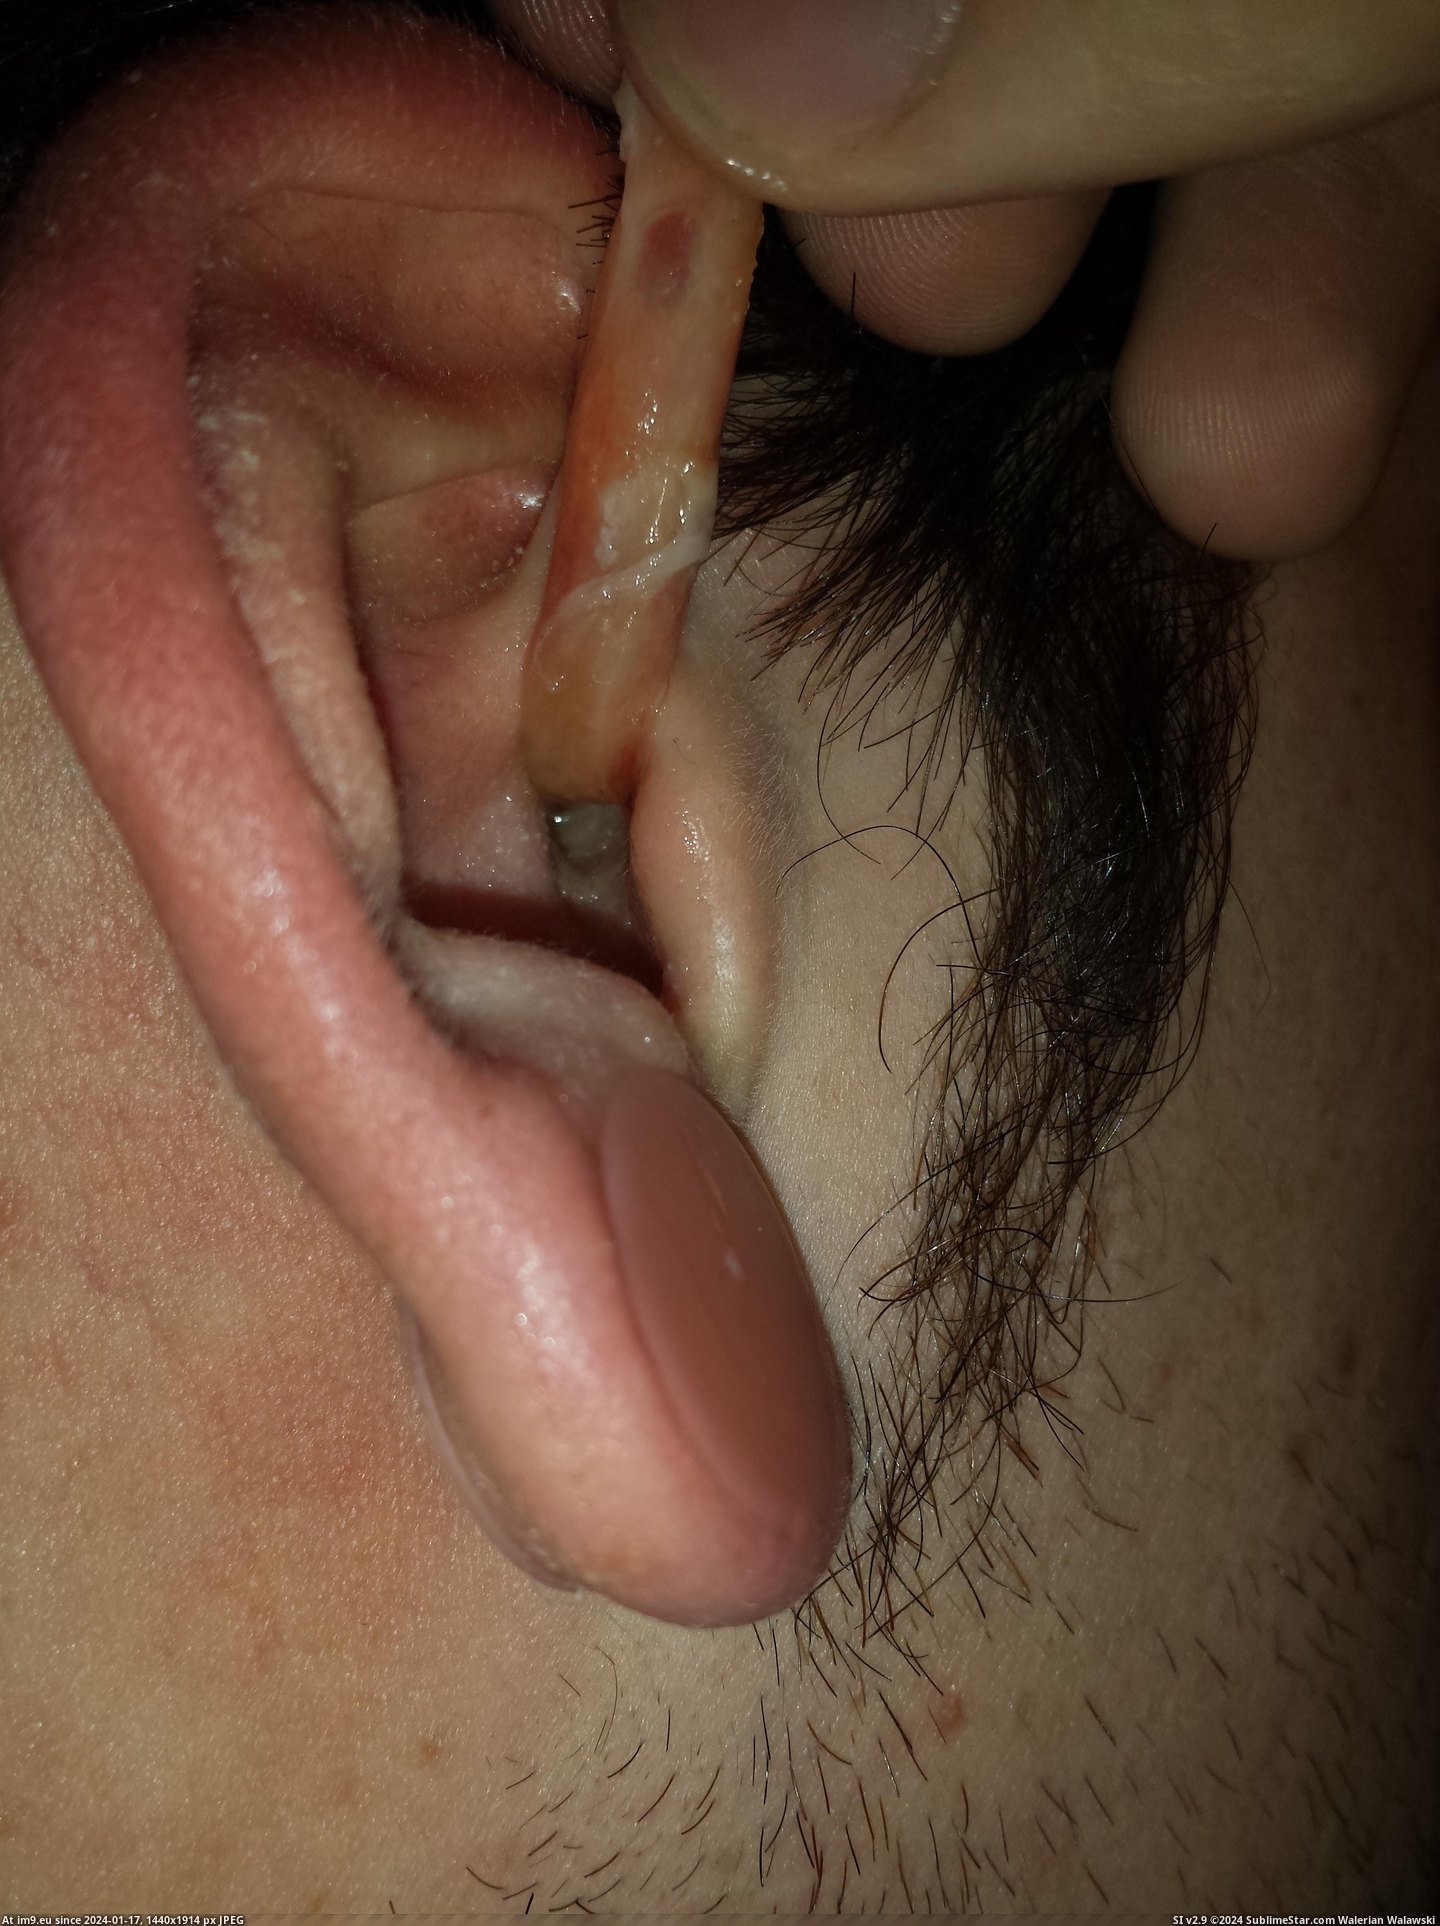 #Wtf #Ear #Infection #Crazy [Wtf] My crazy ear infection 1 Pic. (Изображение из альбом My r/WTF favs))